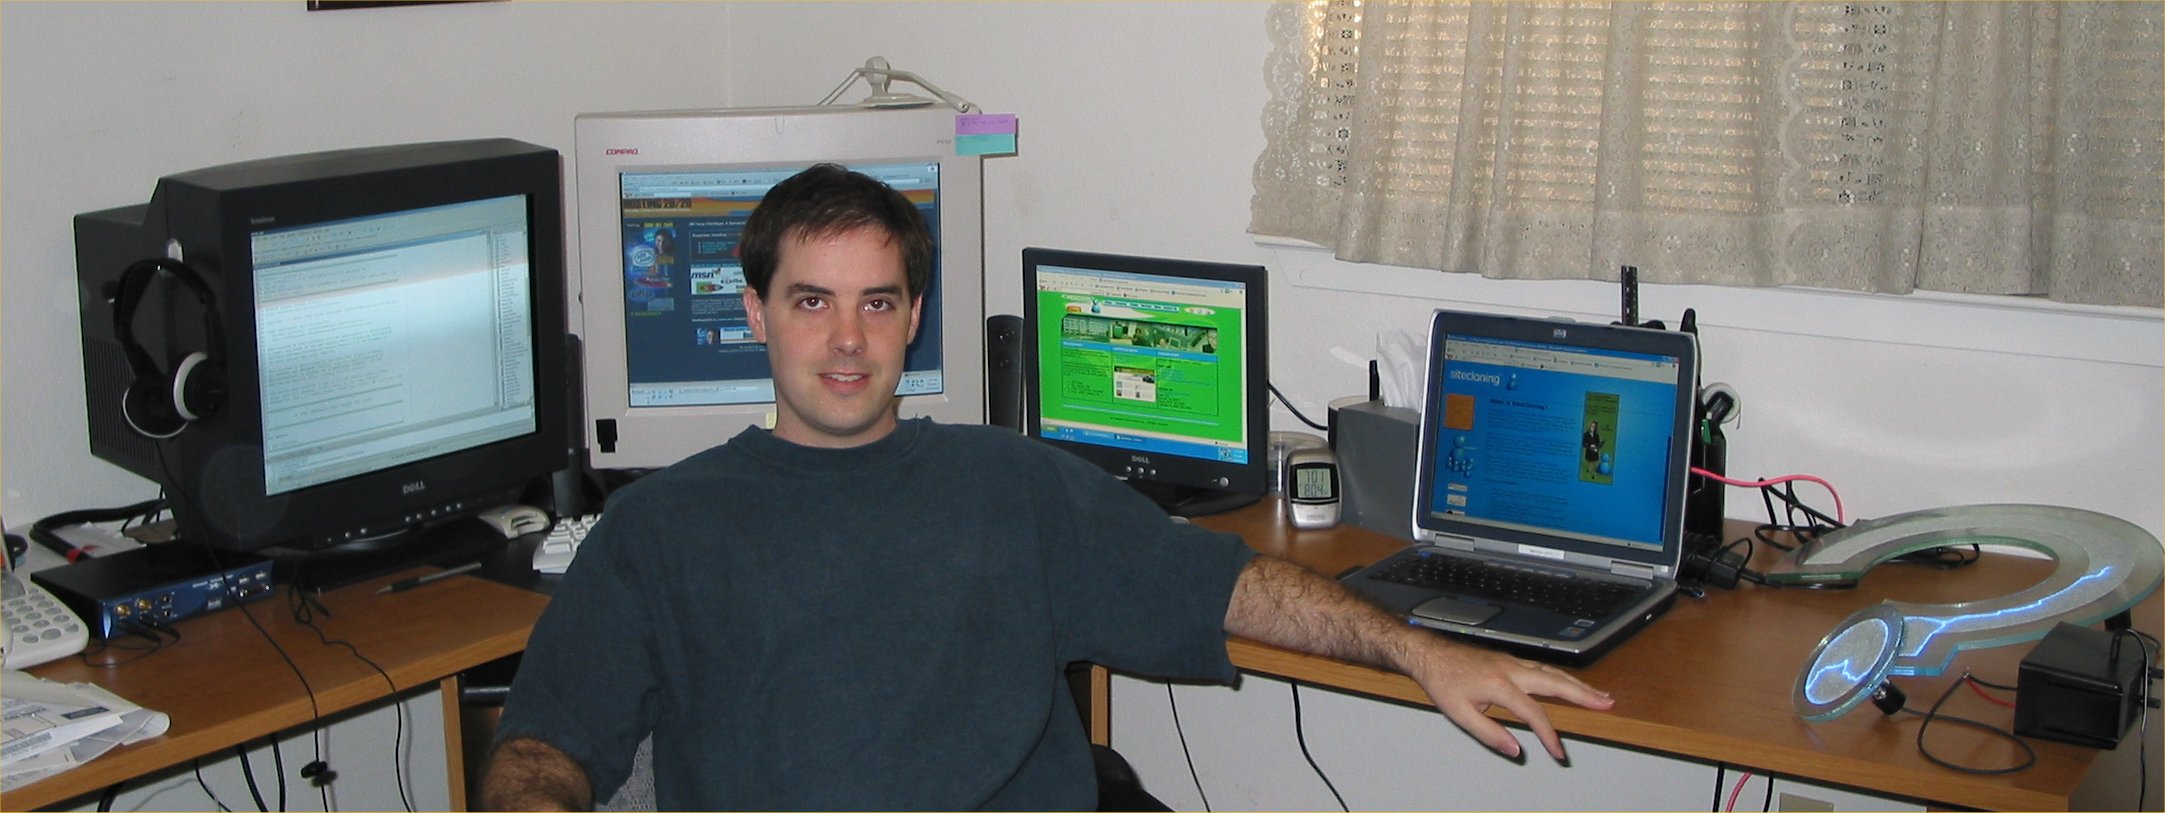 newer shot w/ my typical layout. prolly gonna ditch the 15" lcd. 3 monitors is more cumbersome than it's worth...